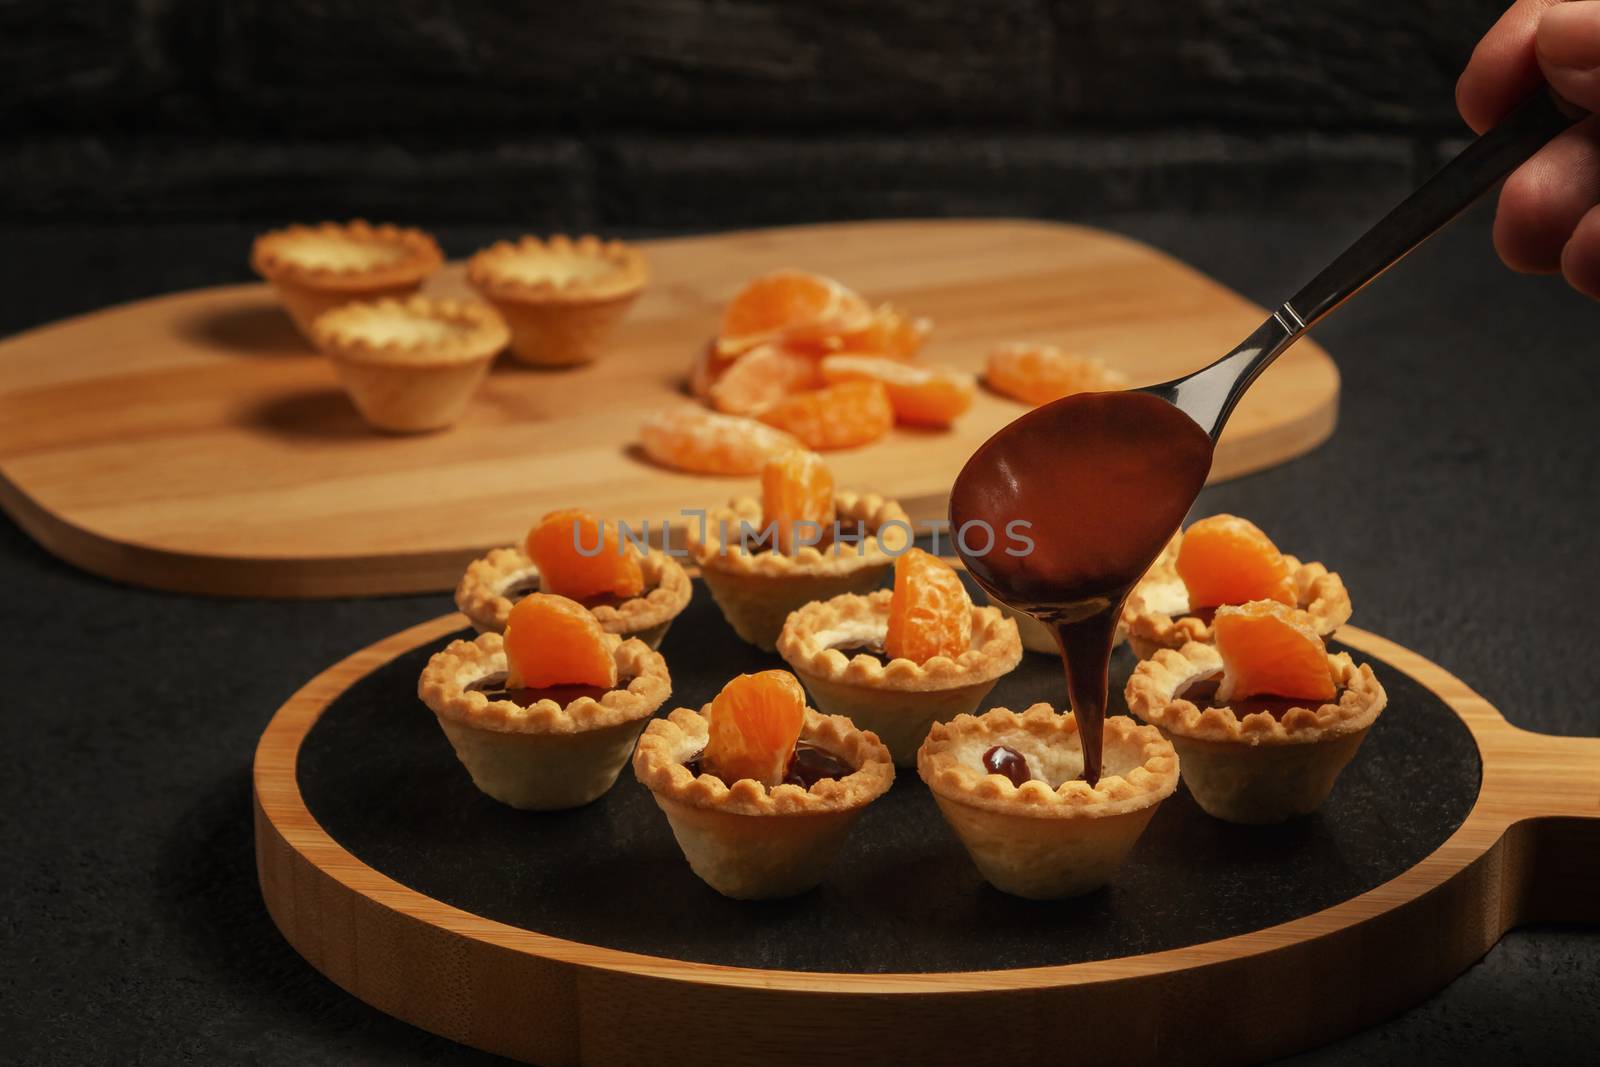 Cooking sweet tartlets with tangerine slices - pouring melted chocolate.